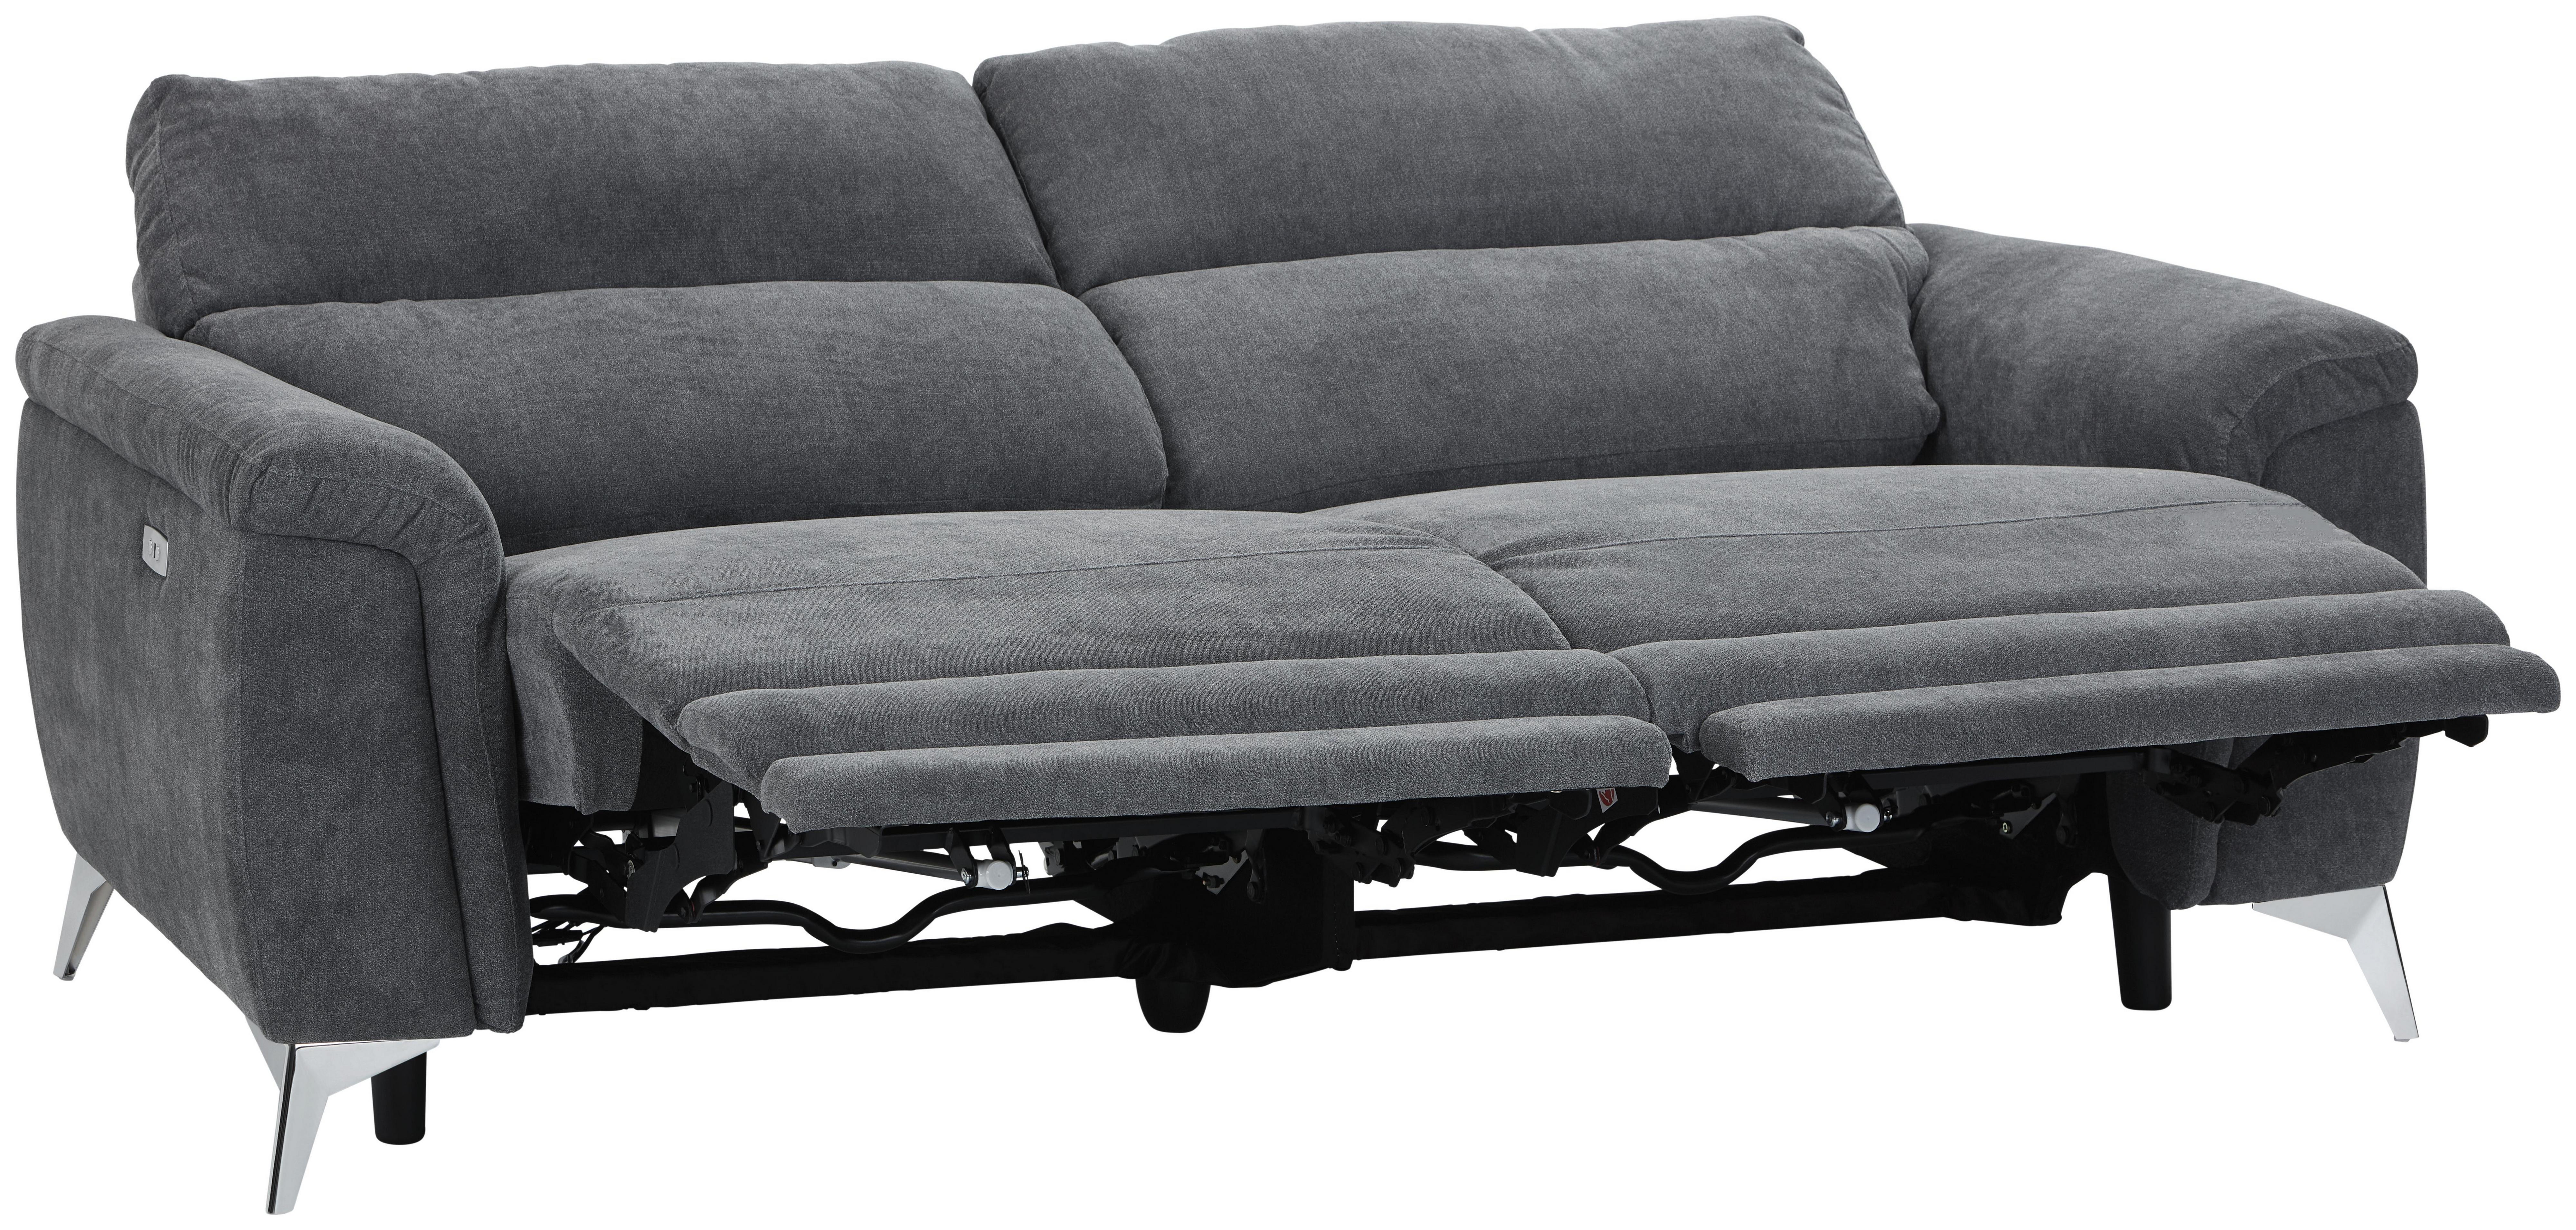 Sofa Mit Relaxfunktion - www.inf-inet.com